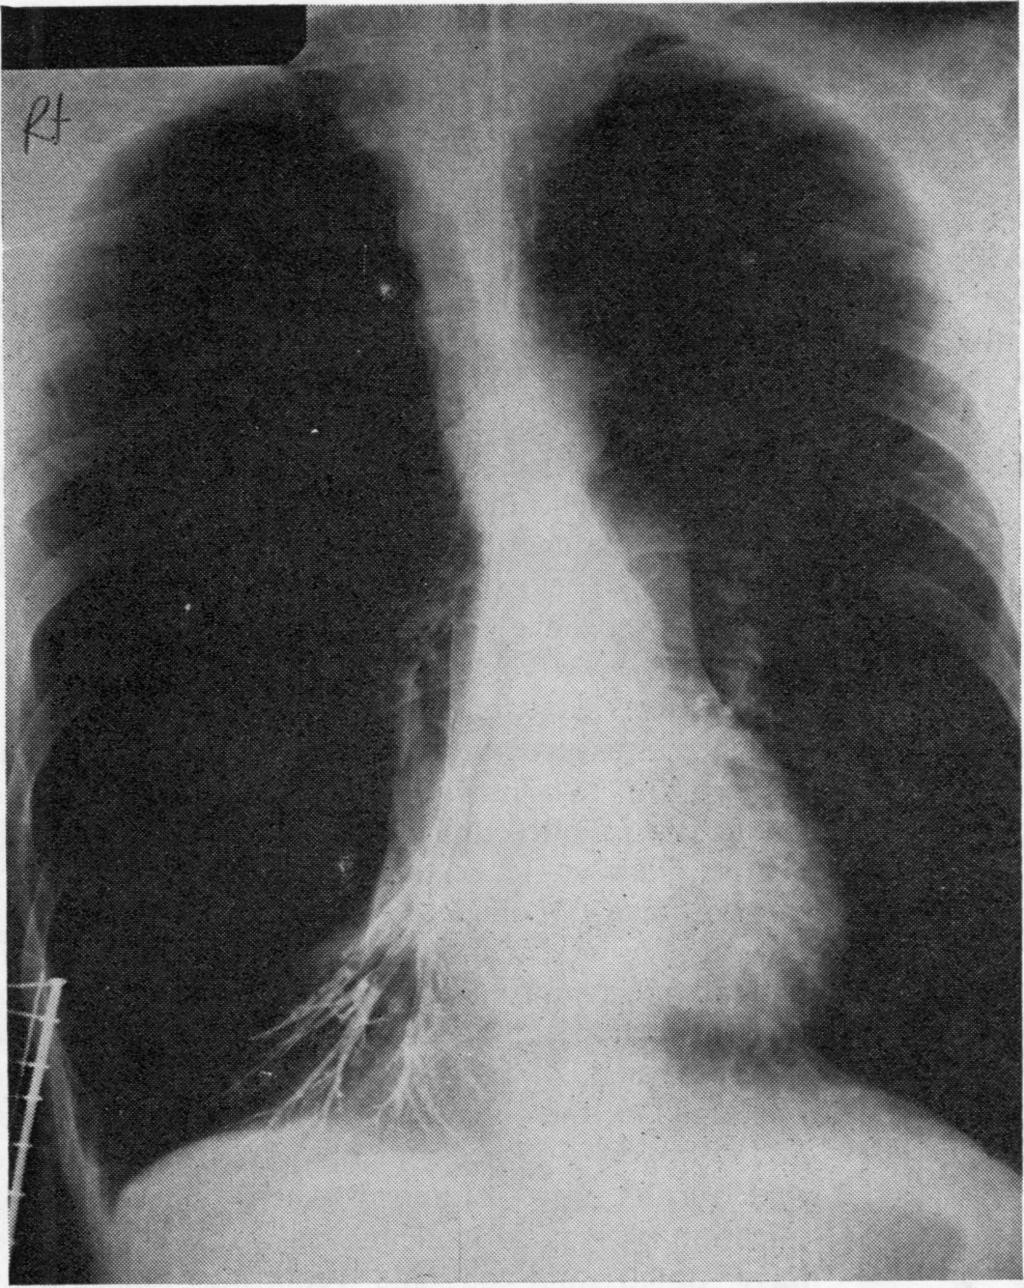 Surgical treatment of bullous lung disease from associated obstructive lung disease.